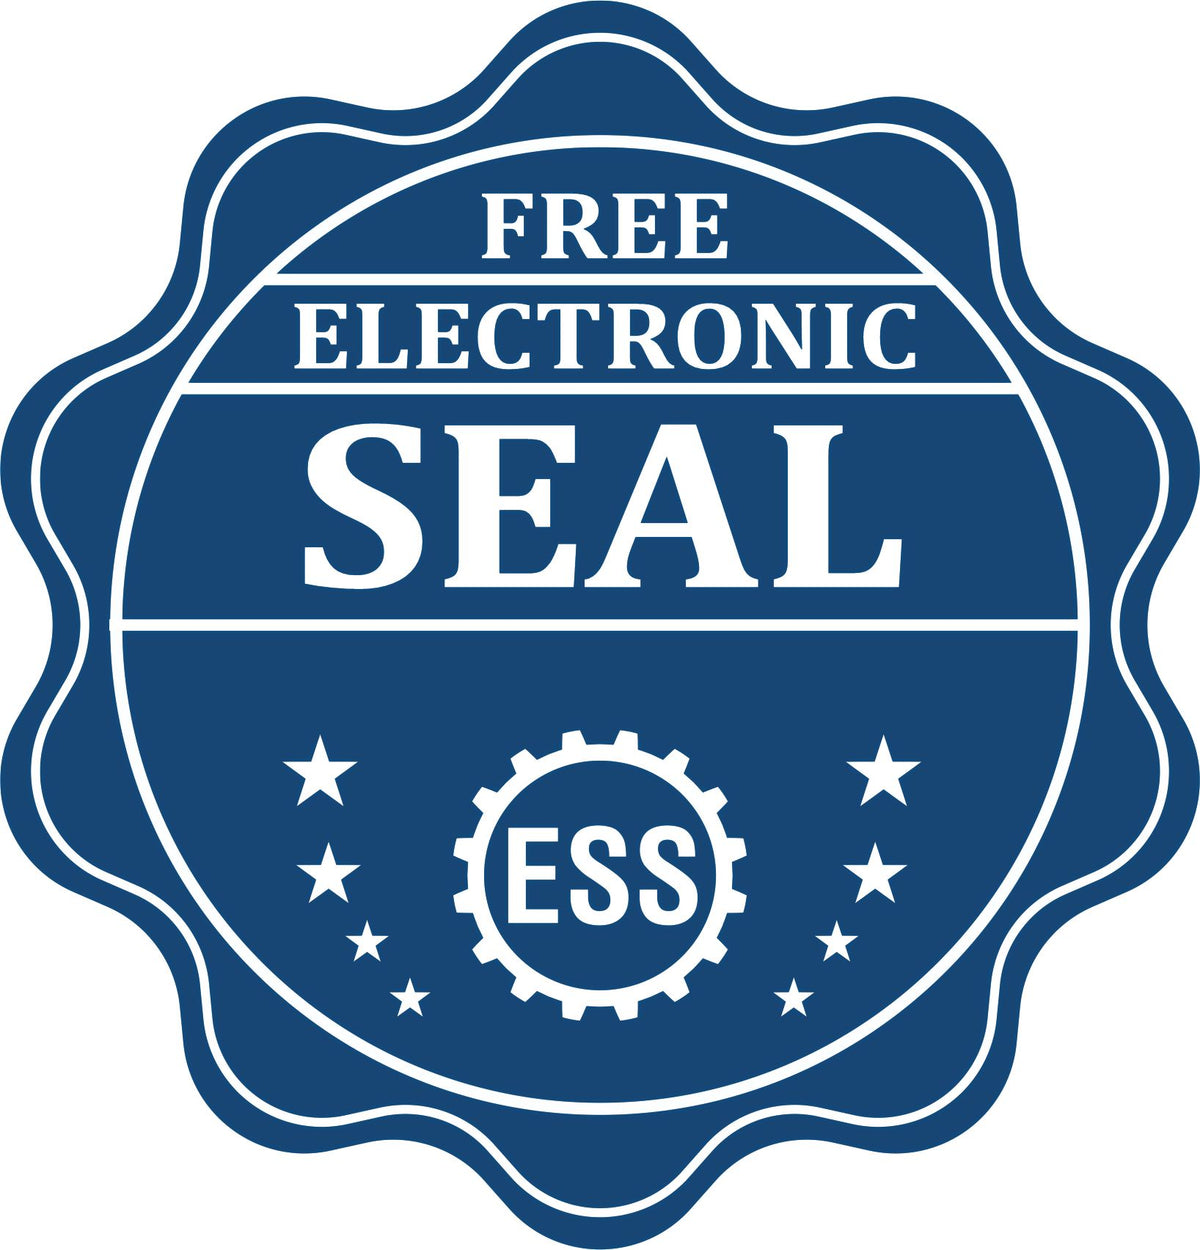 A badge showing a free electronic seal for the Hybrid South Dakota Engineer Seal with stars and the ESS gear on the emblem.